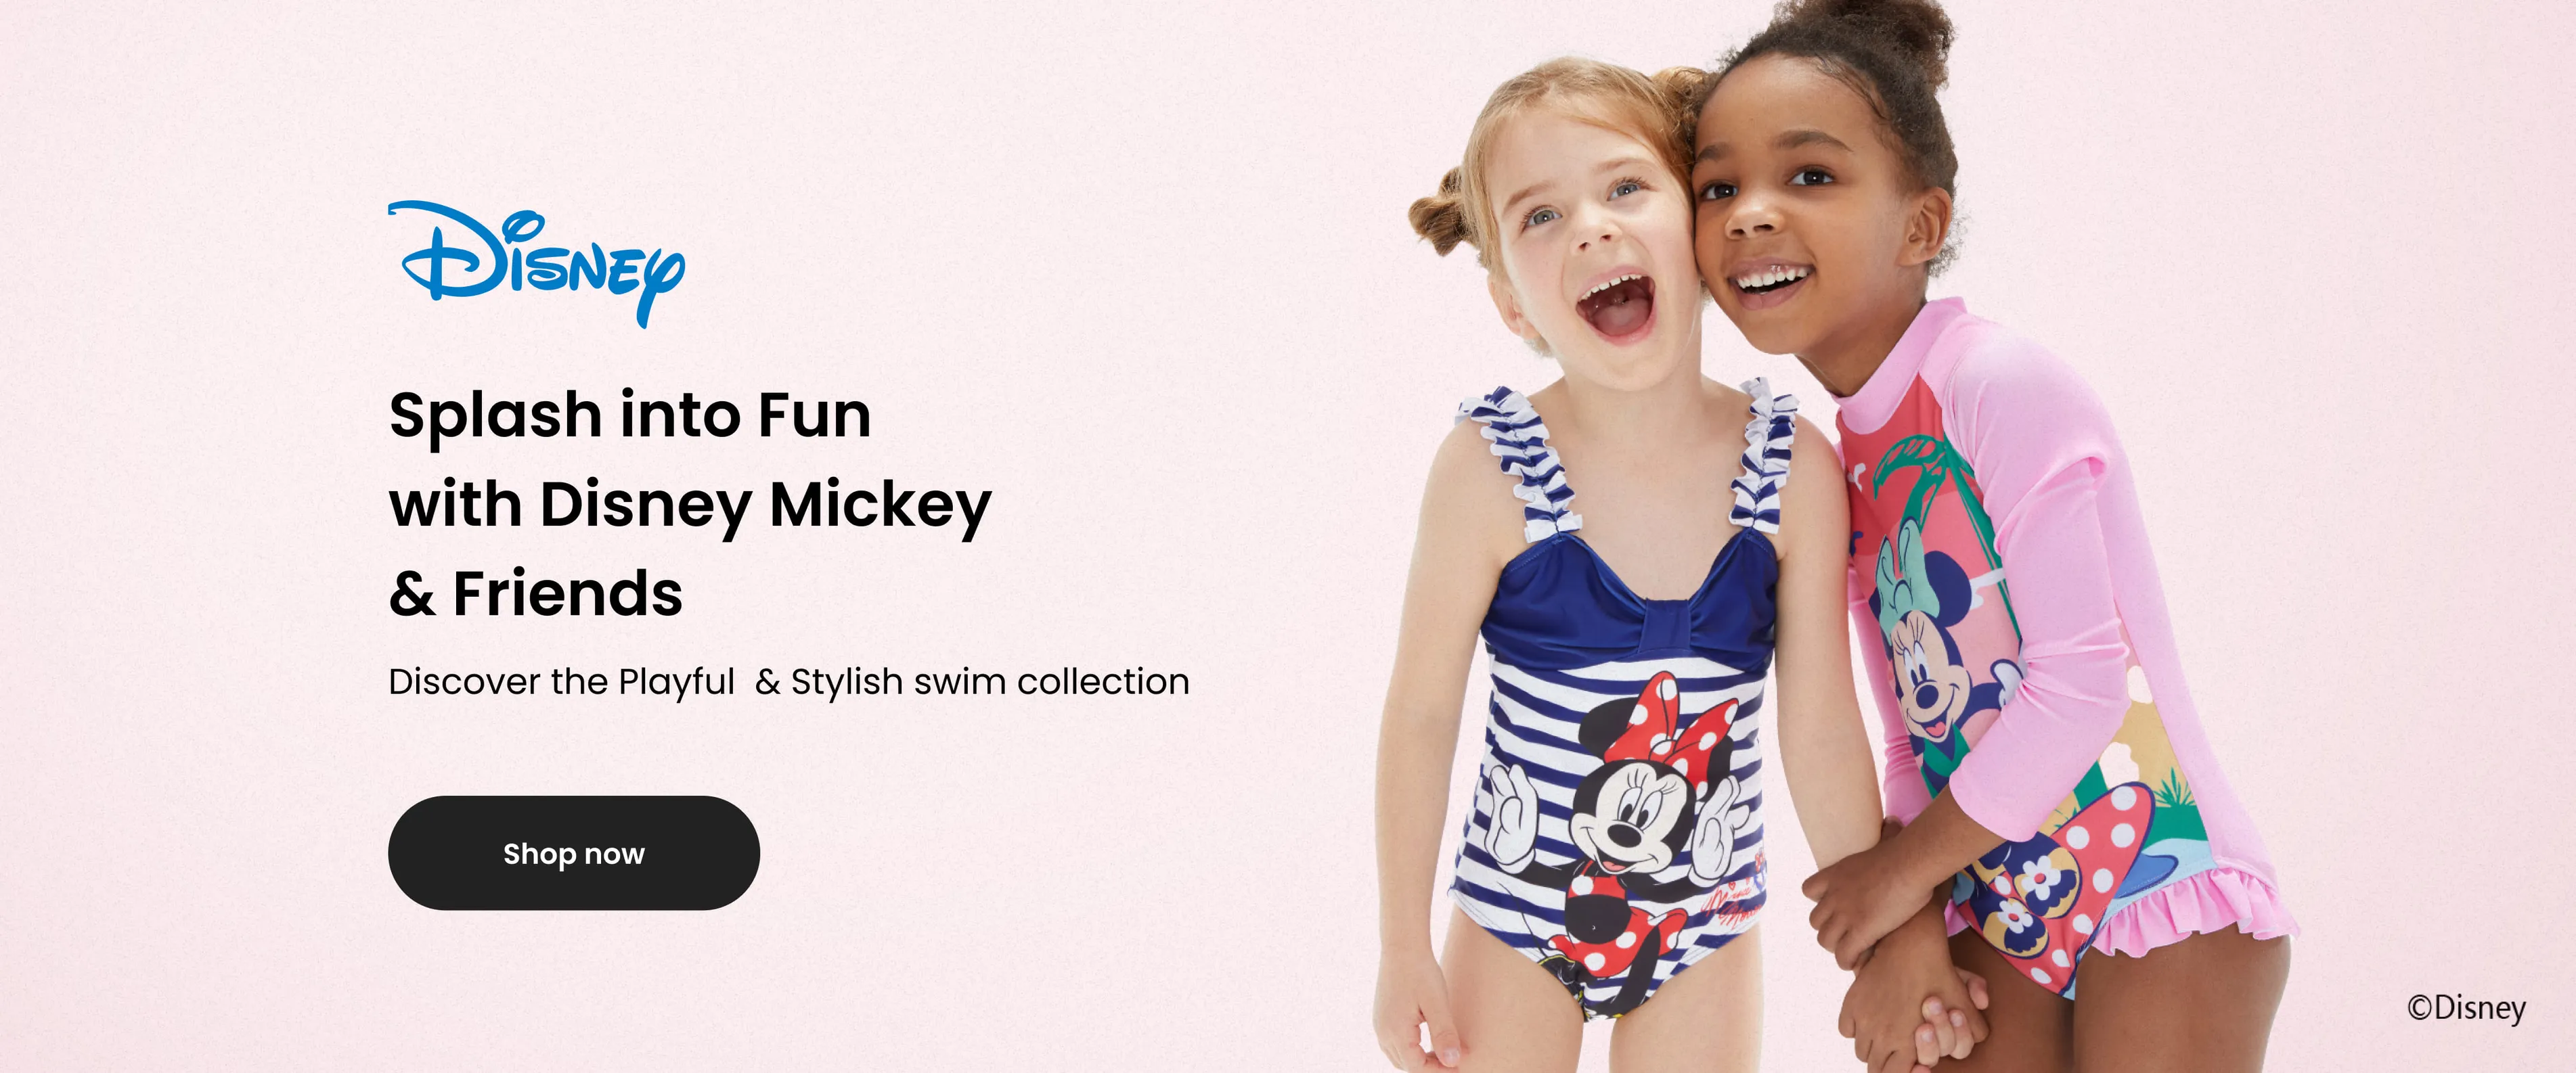 Click it to join Splash into Fun with Disney Mickey & Friends activity